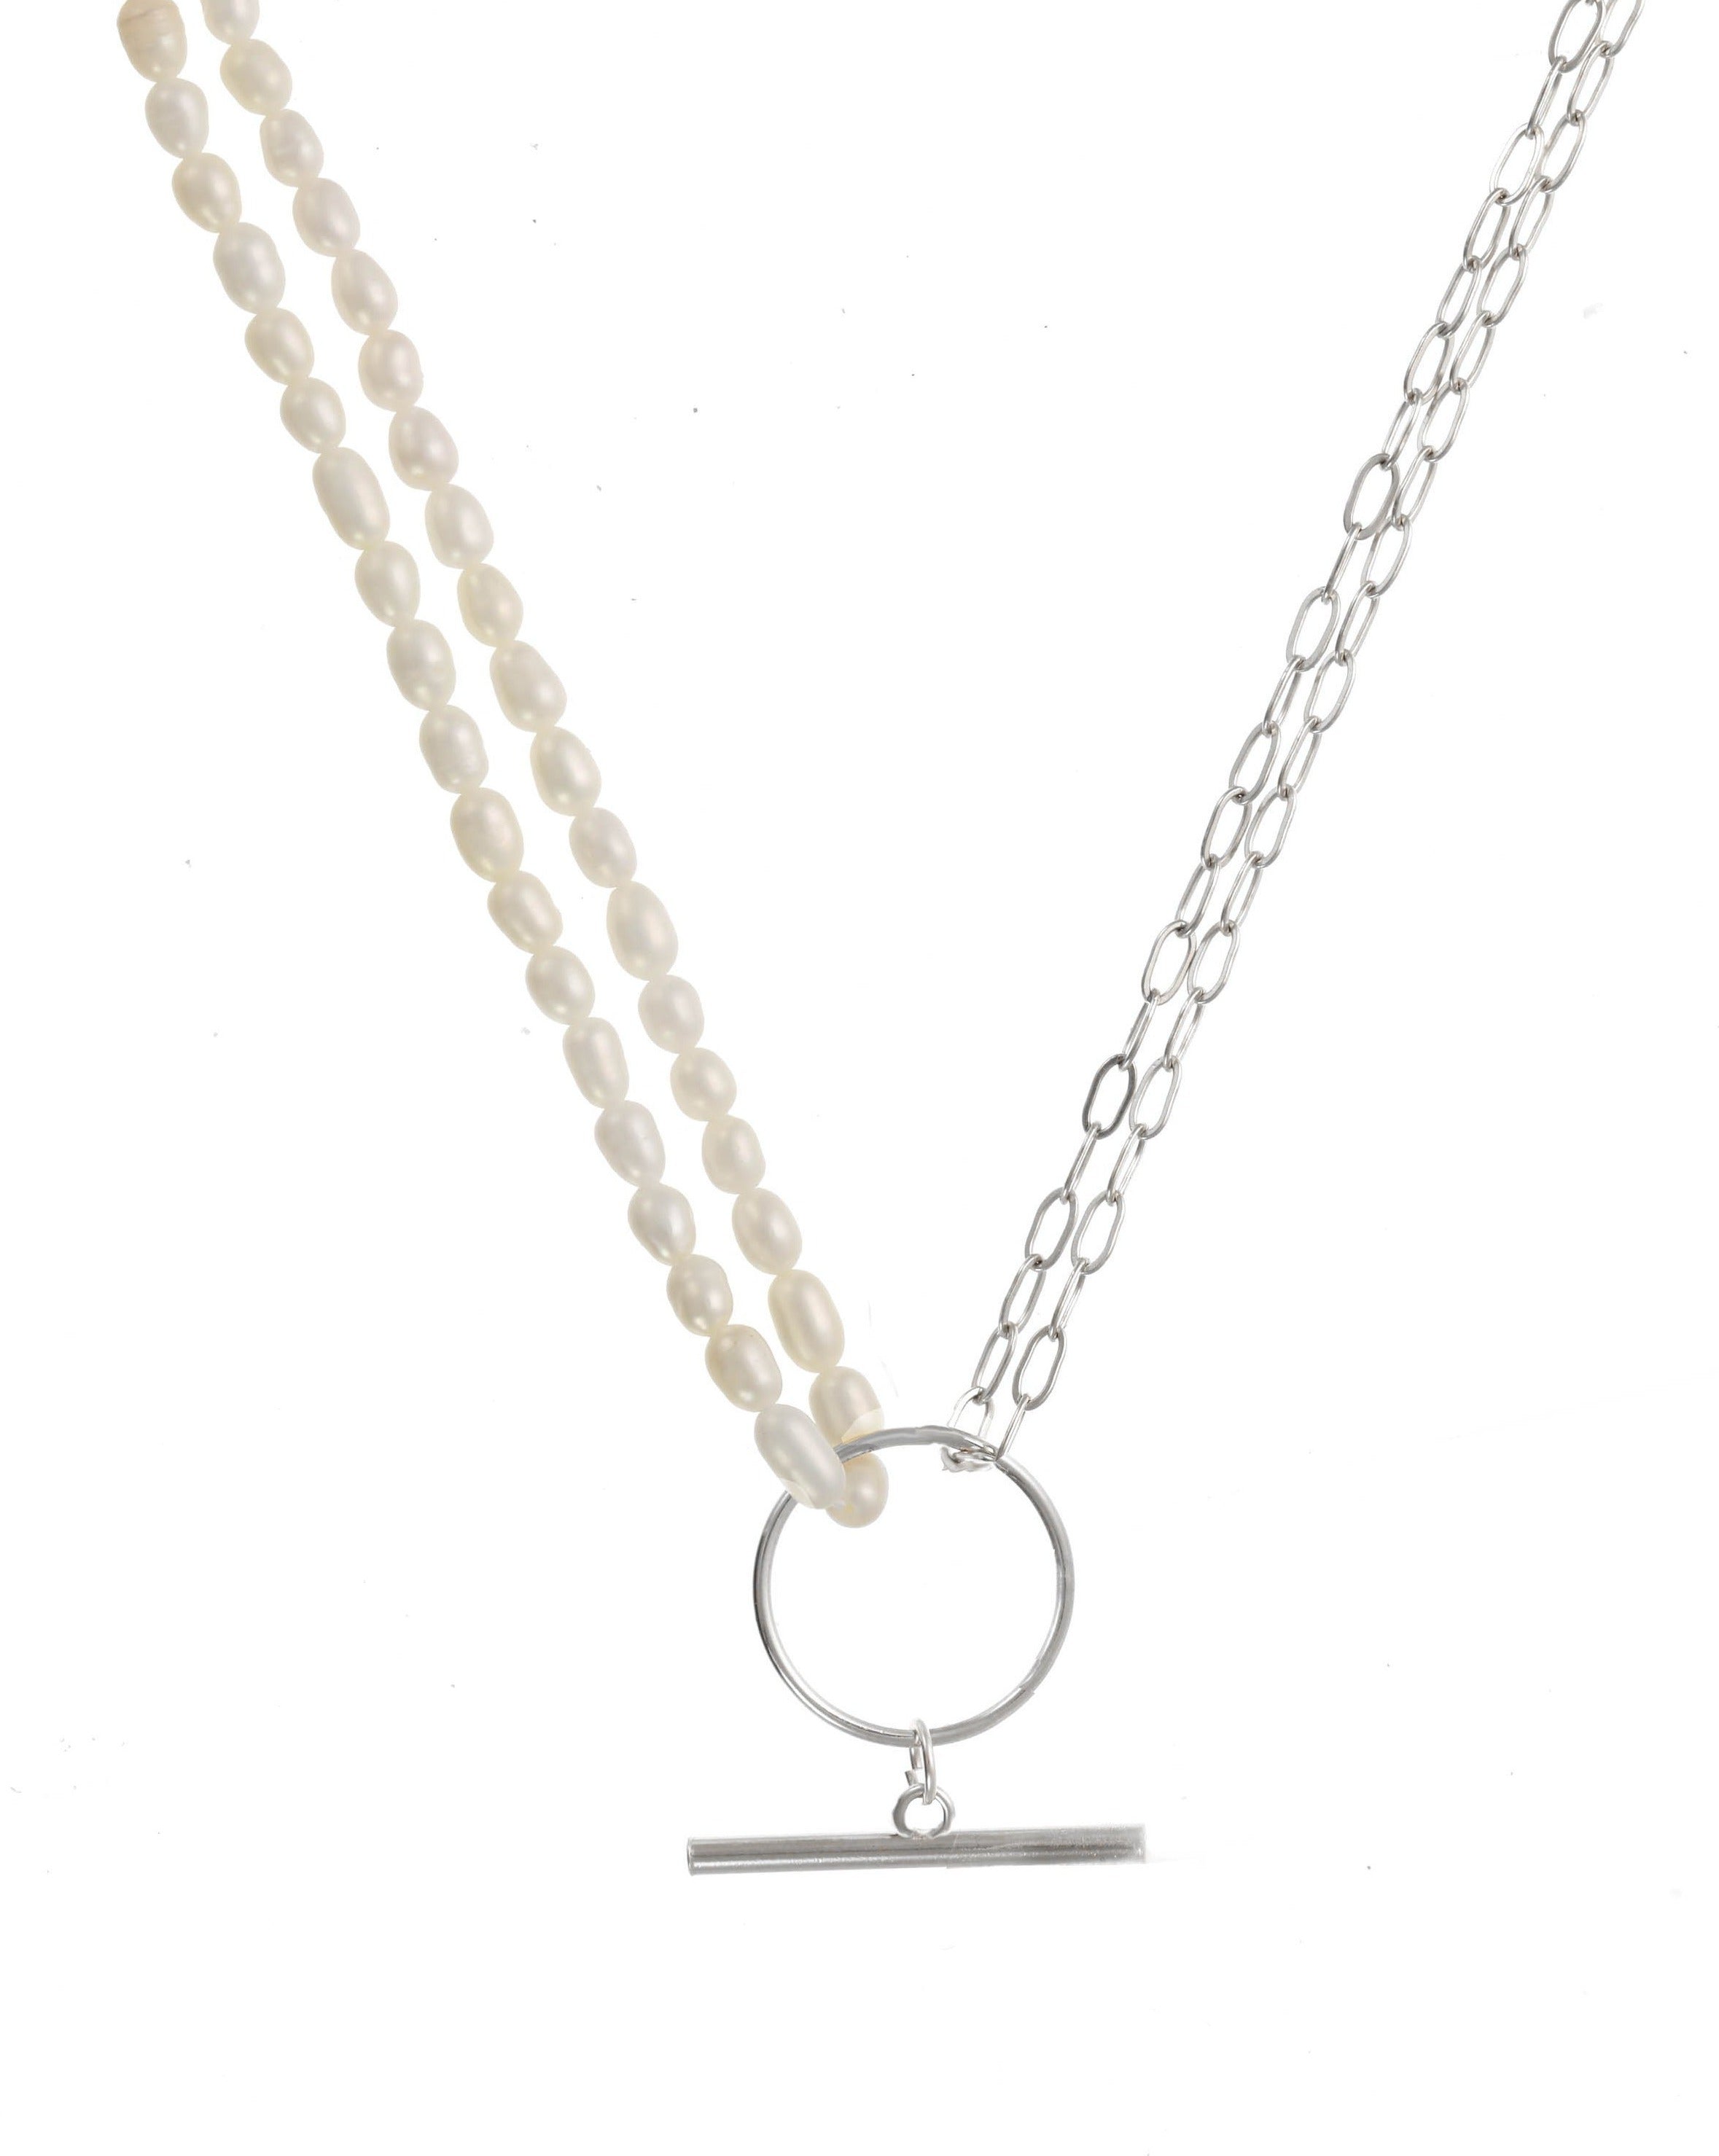 Trillian Necklace by KOZAKH. A 16 to 18 inch adjustable length necklace, with 4mm white pearl strand on one half, the other half is crafted in Sterling Silver, featuring a horizontal bar.